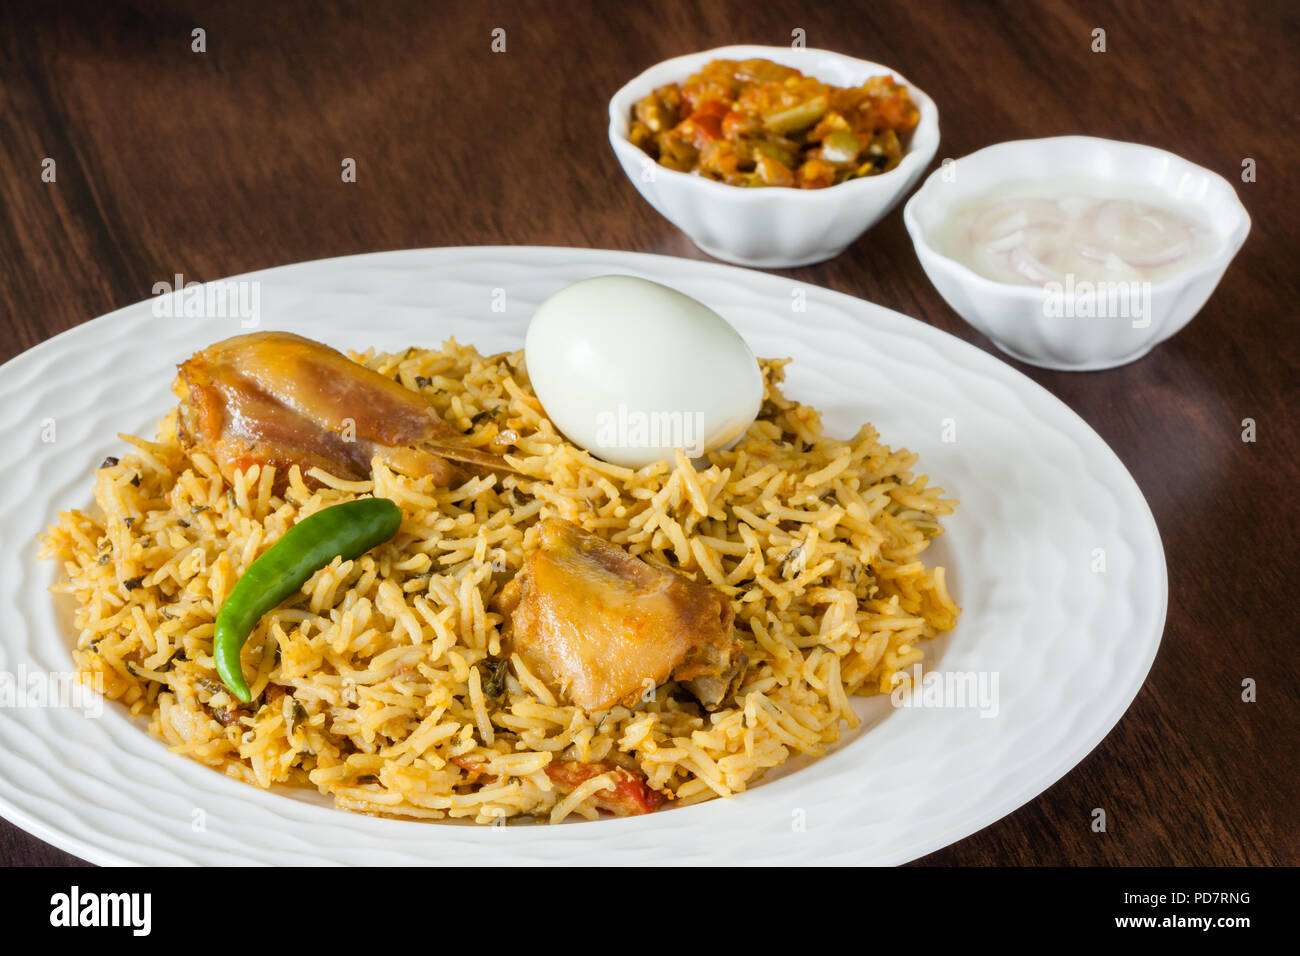 Closeup view from the top of delicious Indian chicken biryani served with traditional sides, egg, raita and gravy. Natural light used. Stock Photo